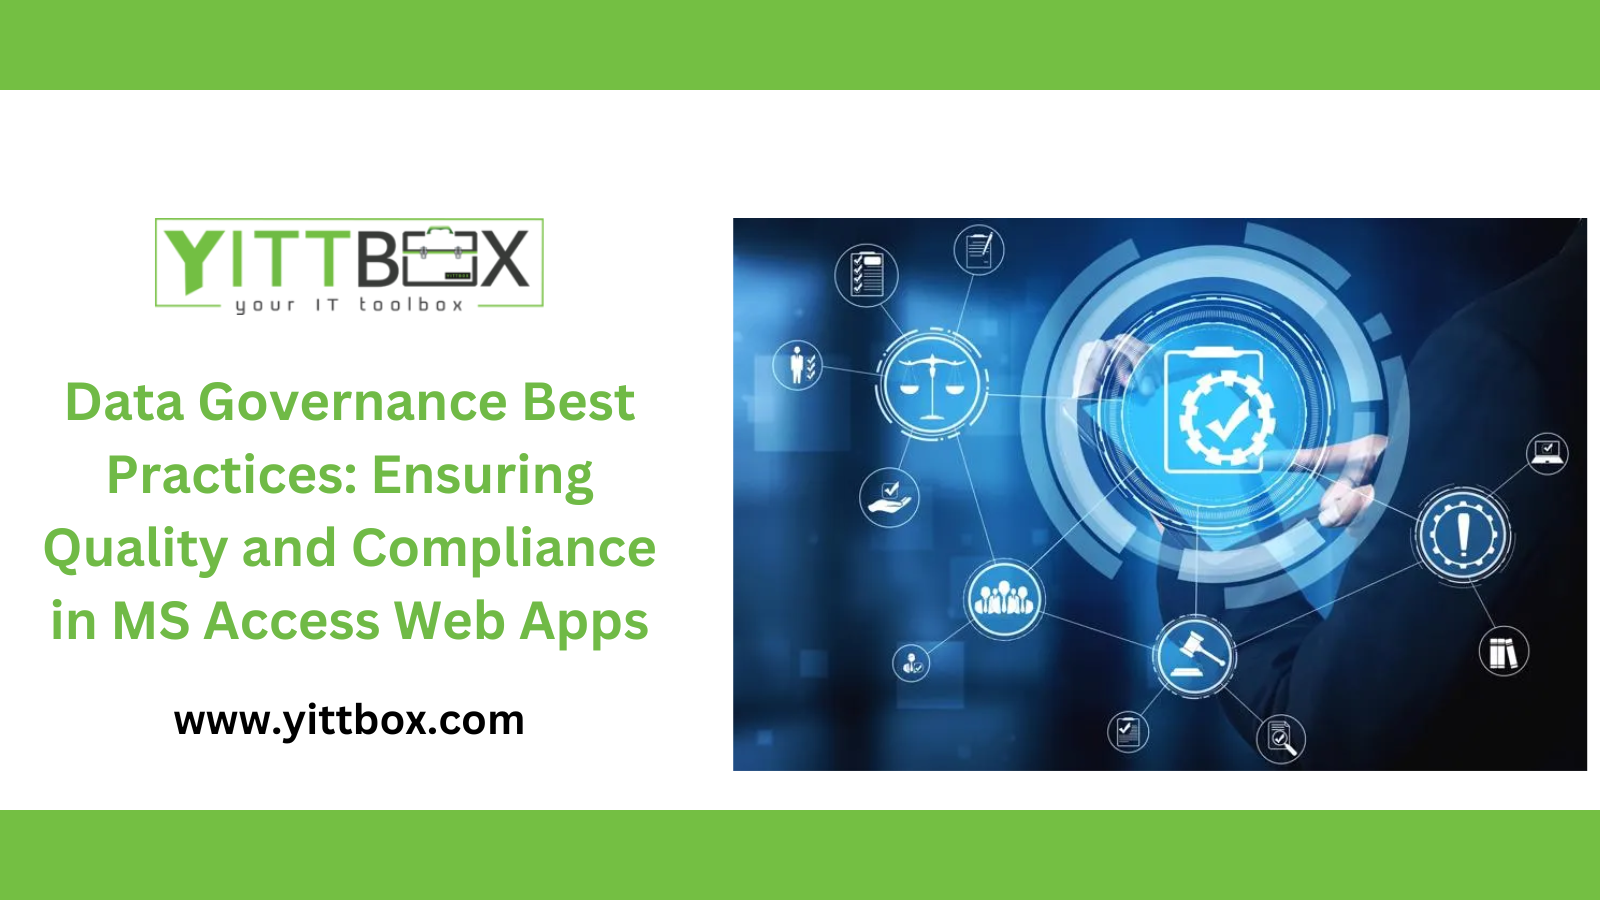 Data Governance Best Practices: Ensuring Quality and Compliance in MS Access Web Apps